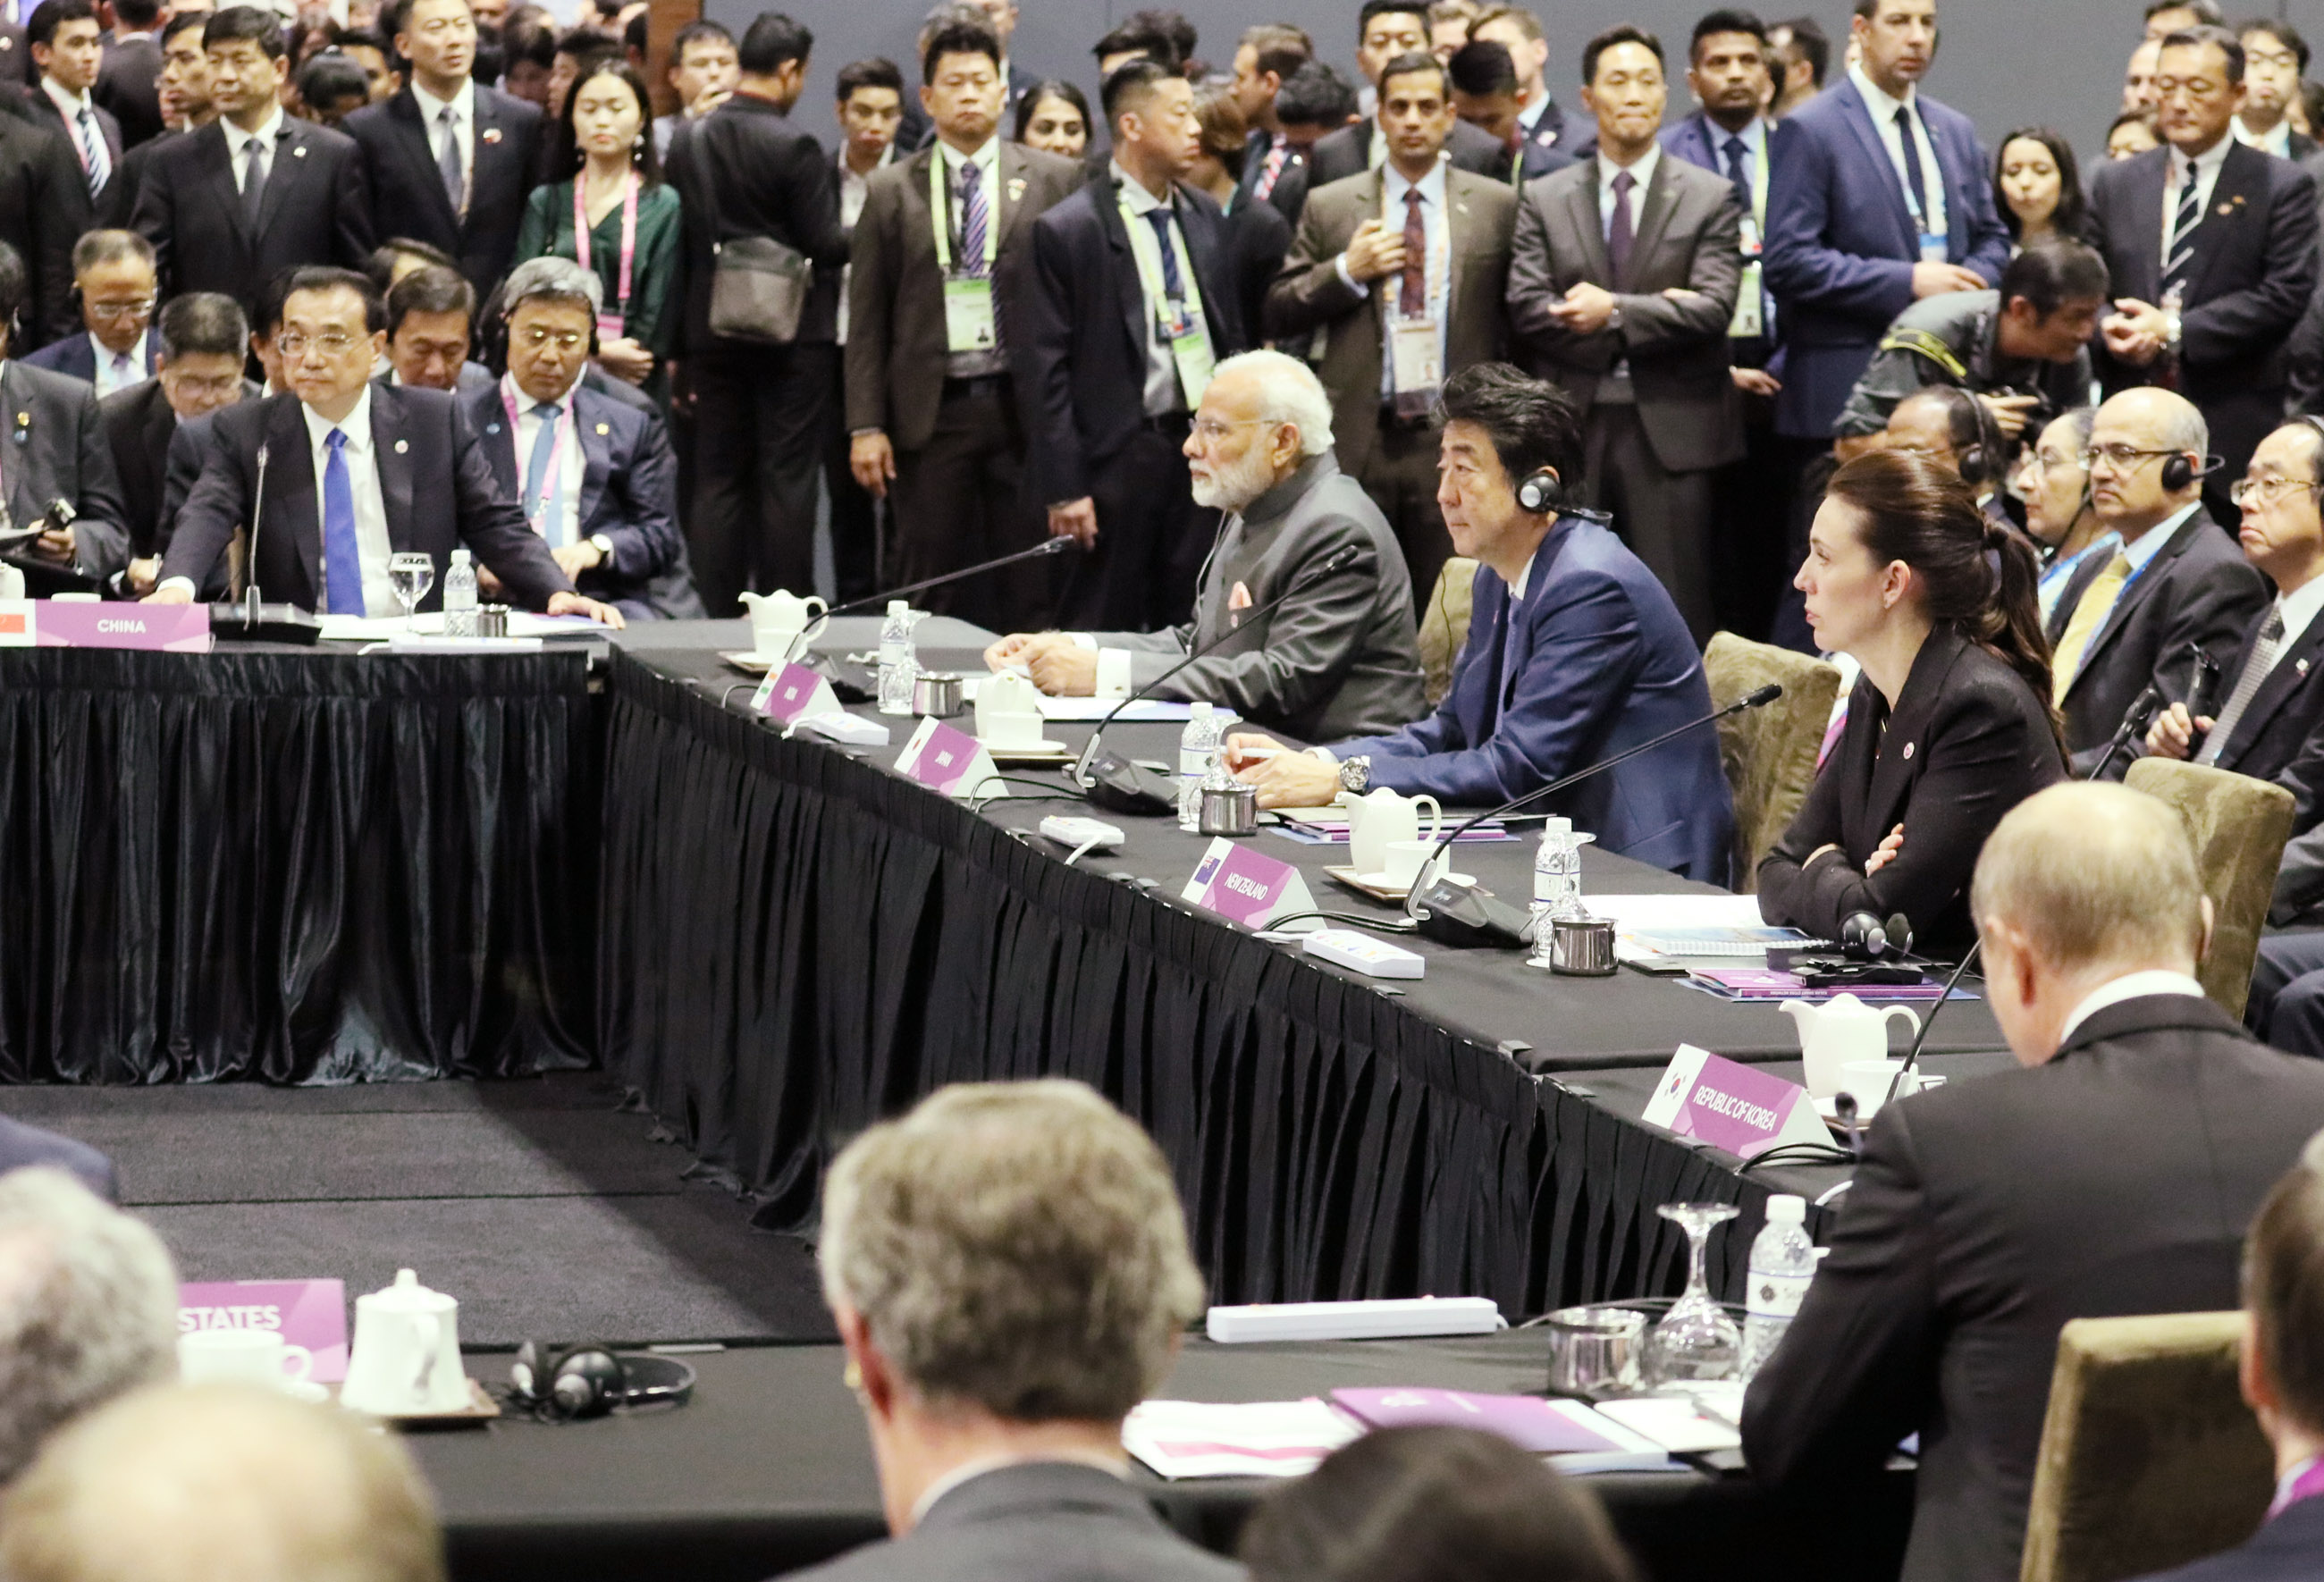 Photograph of Prime Minister Abe attending the East Asia Summit